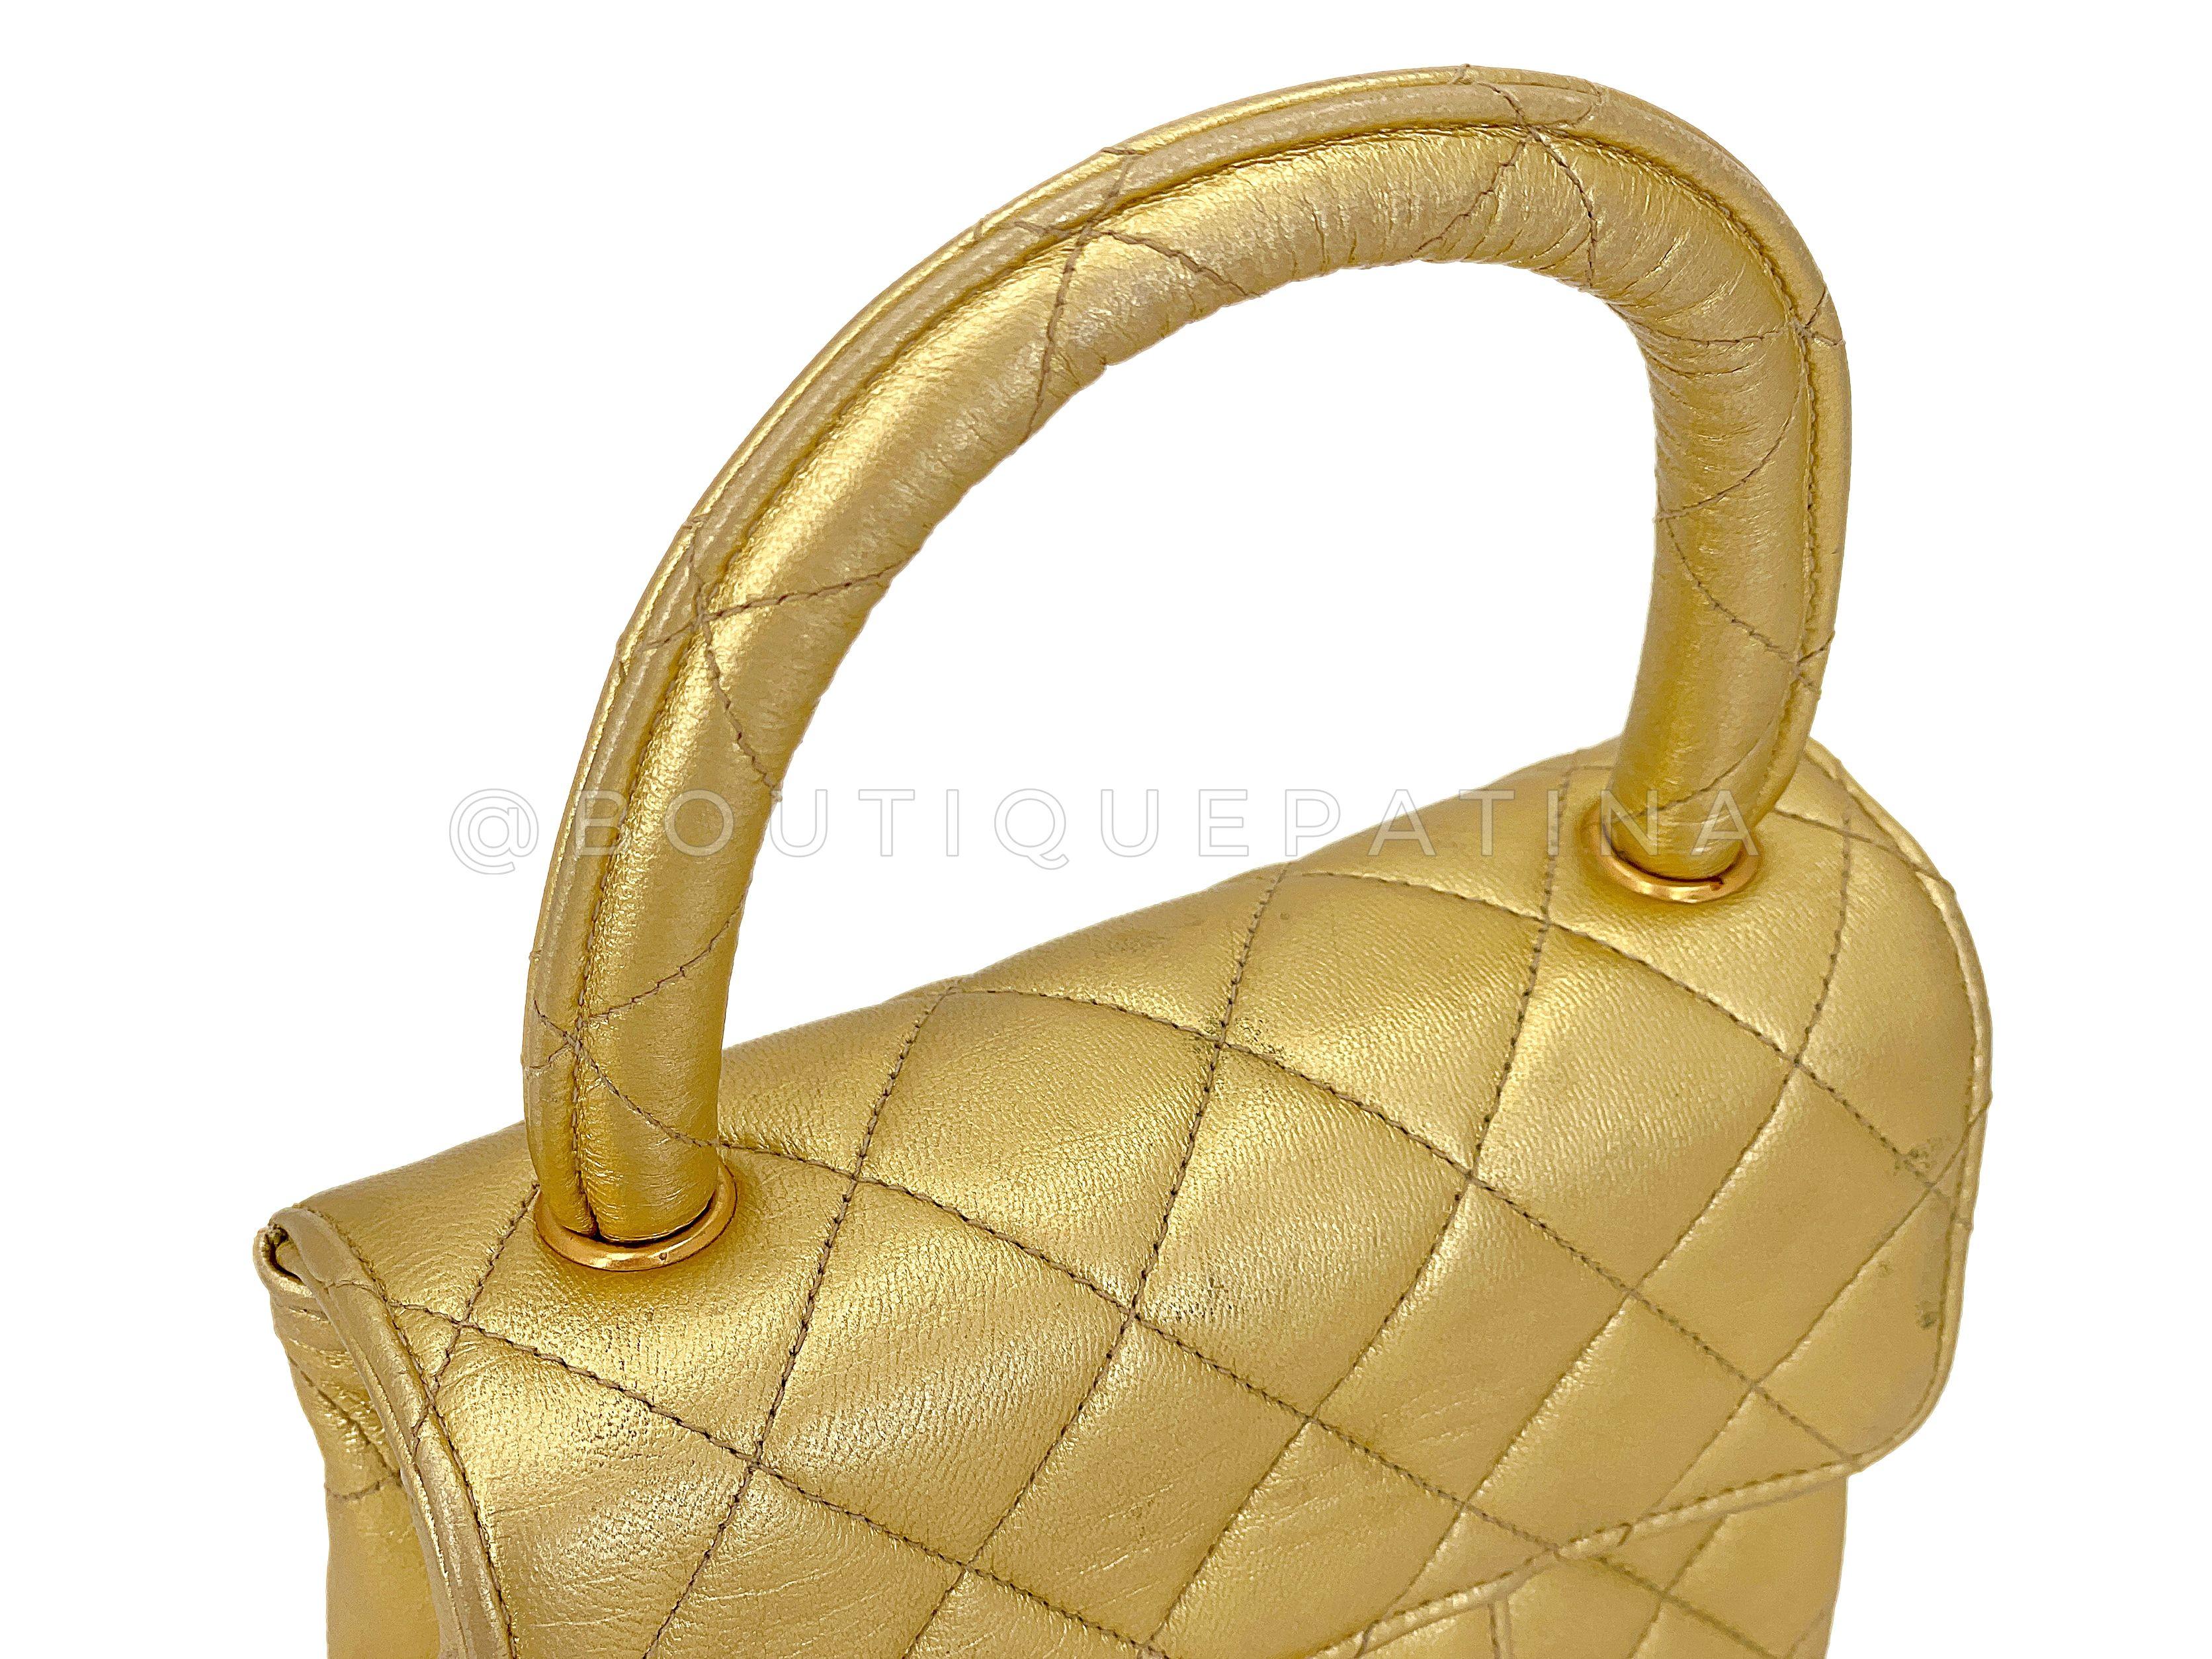 Chanel 1994 Vintage Gold “Child” Extra Square Mini Kelly Bag 67404 For Sale 3